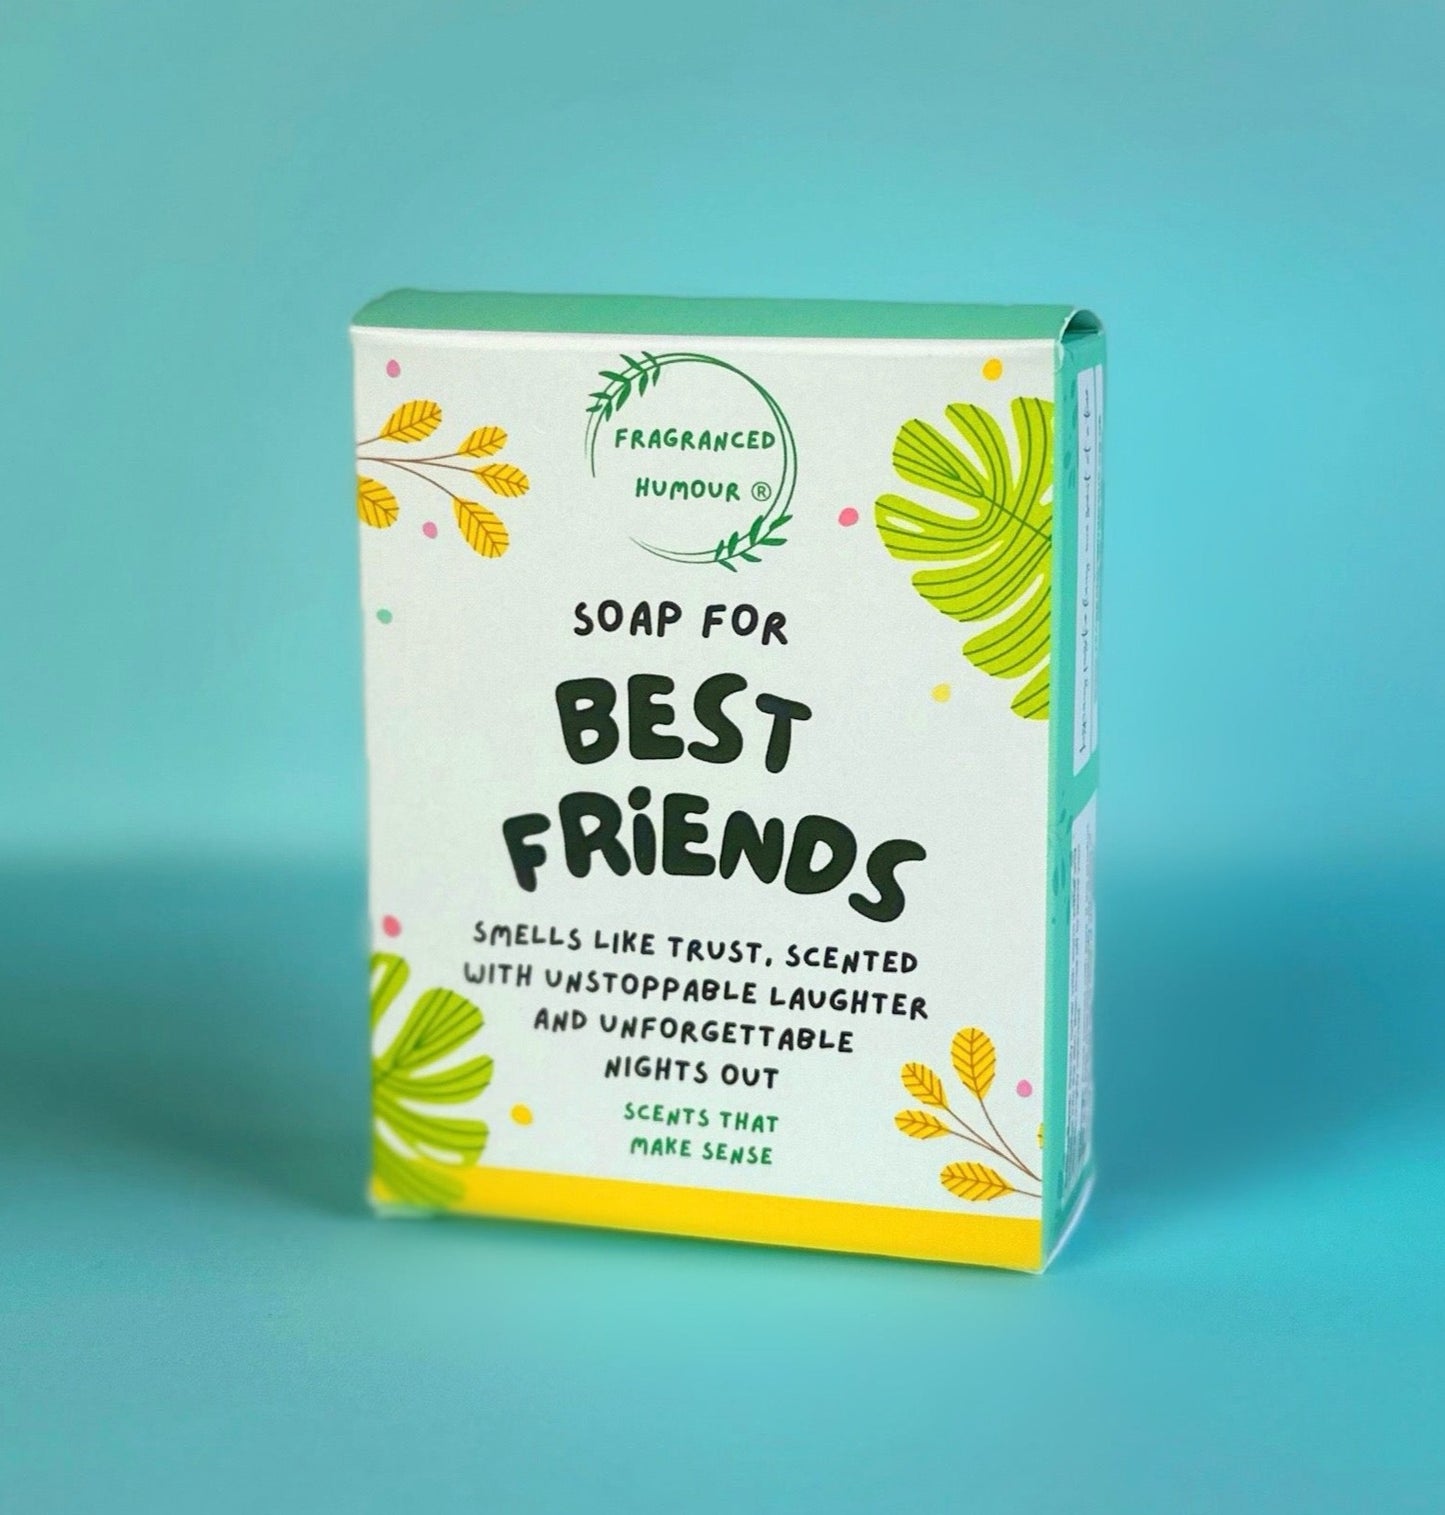 funny birthday gift idea for best friend. novelty soap with funny text on the box: soap for best friends, smells like trust, scented with unstoppable laughter and unforgettable nights out.